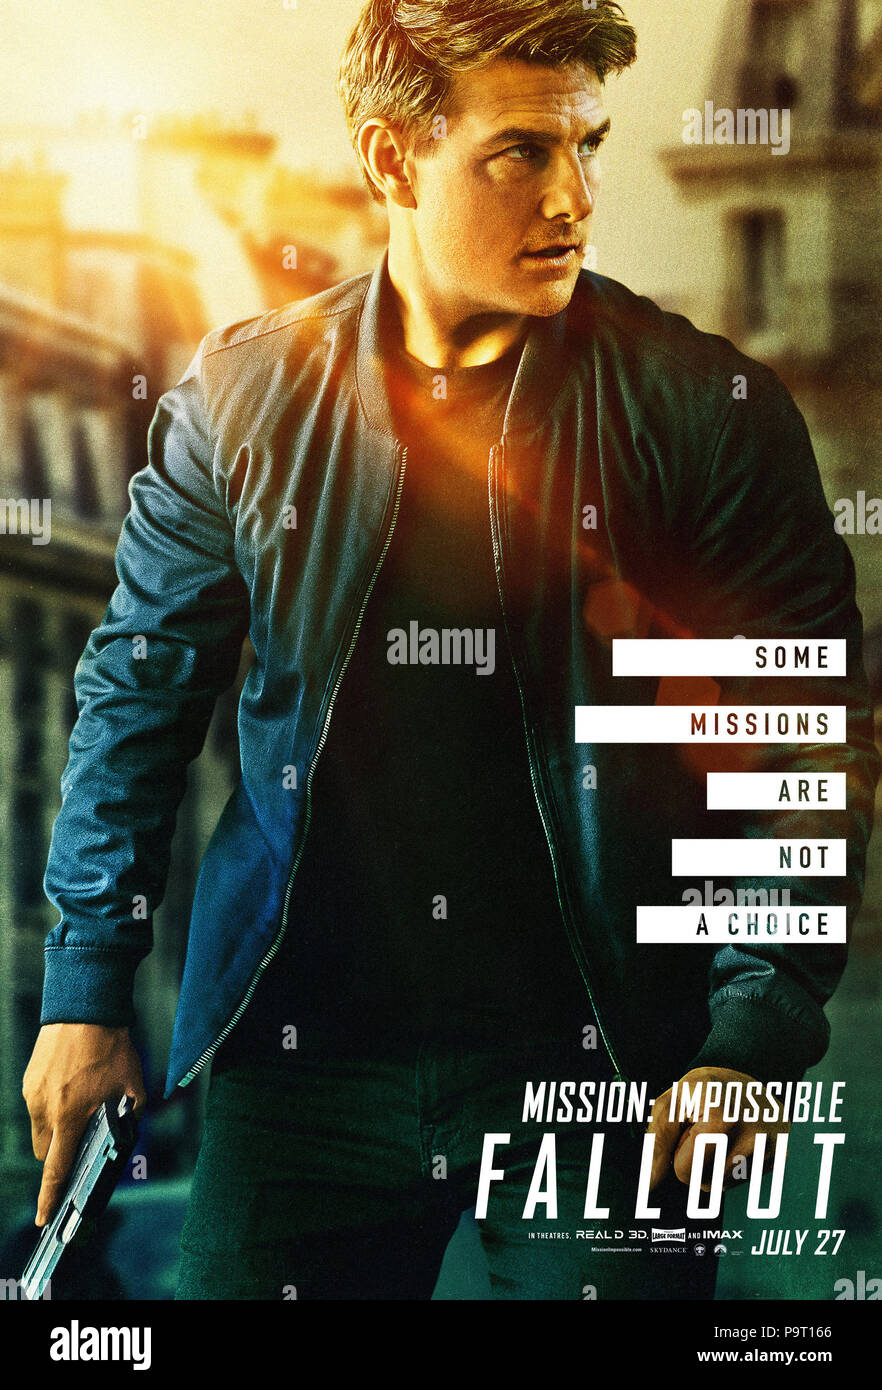 RELEASE DATE: July 27, 2018 TITLE: Mission: Impossible - Fallout STUDIO: Paramount Pictures DIRECTOR: Christopher McQuarrie PLOT: Ethan Hunt and his IMF team, along with some familiar allies, race against time after a mission gone wrong. STARRING: Poster art TOM CRUISE as Ethan Hunt. (Credit Image: © Paramount Pictures/Entertainment Pictures) Stock Photo